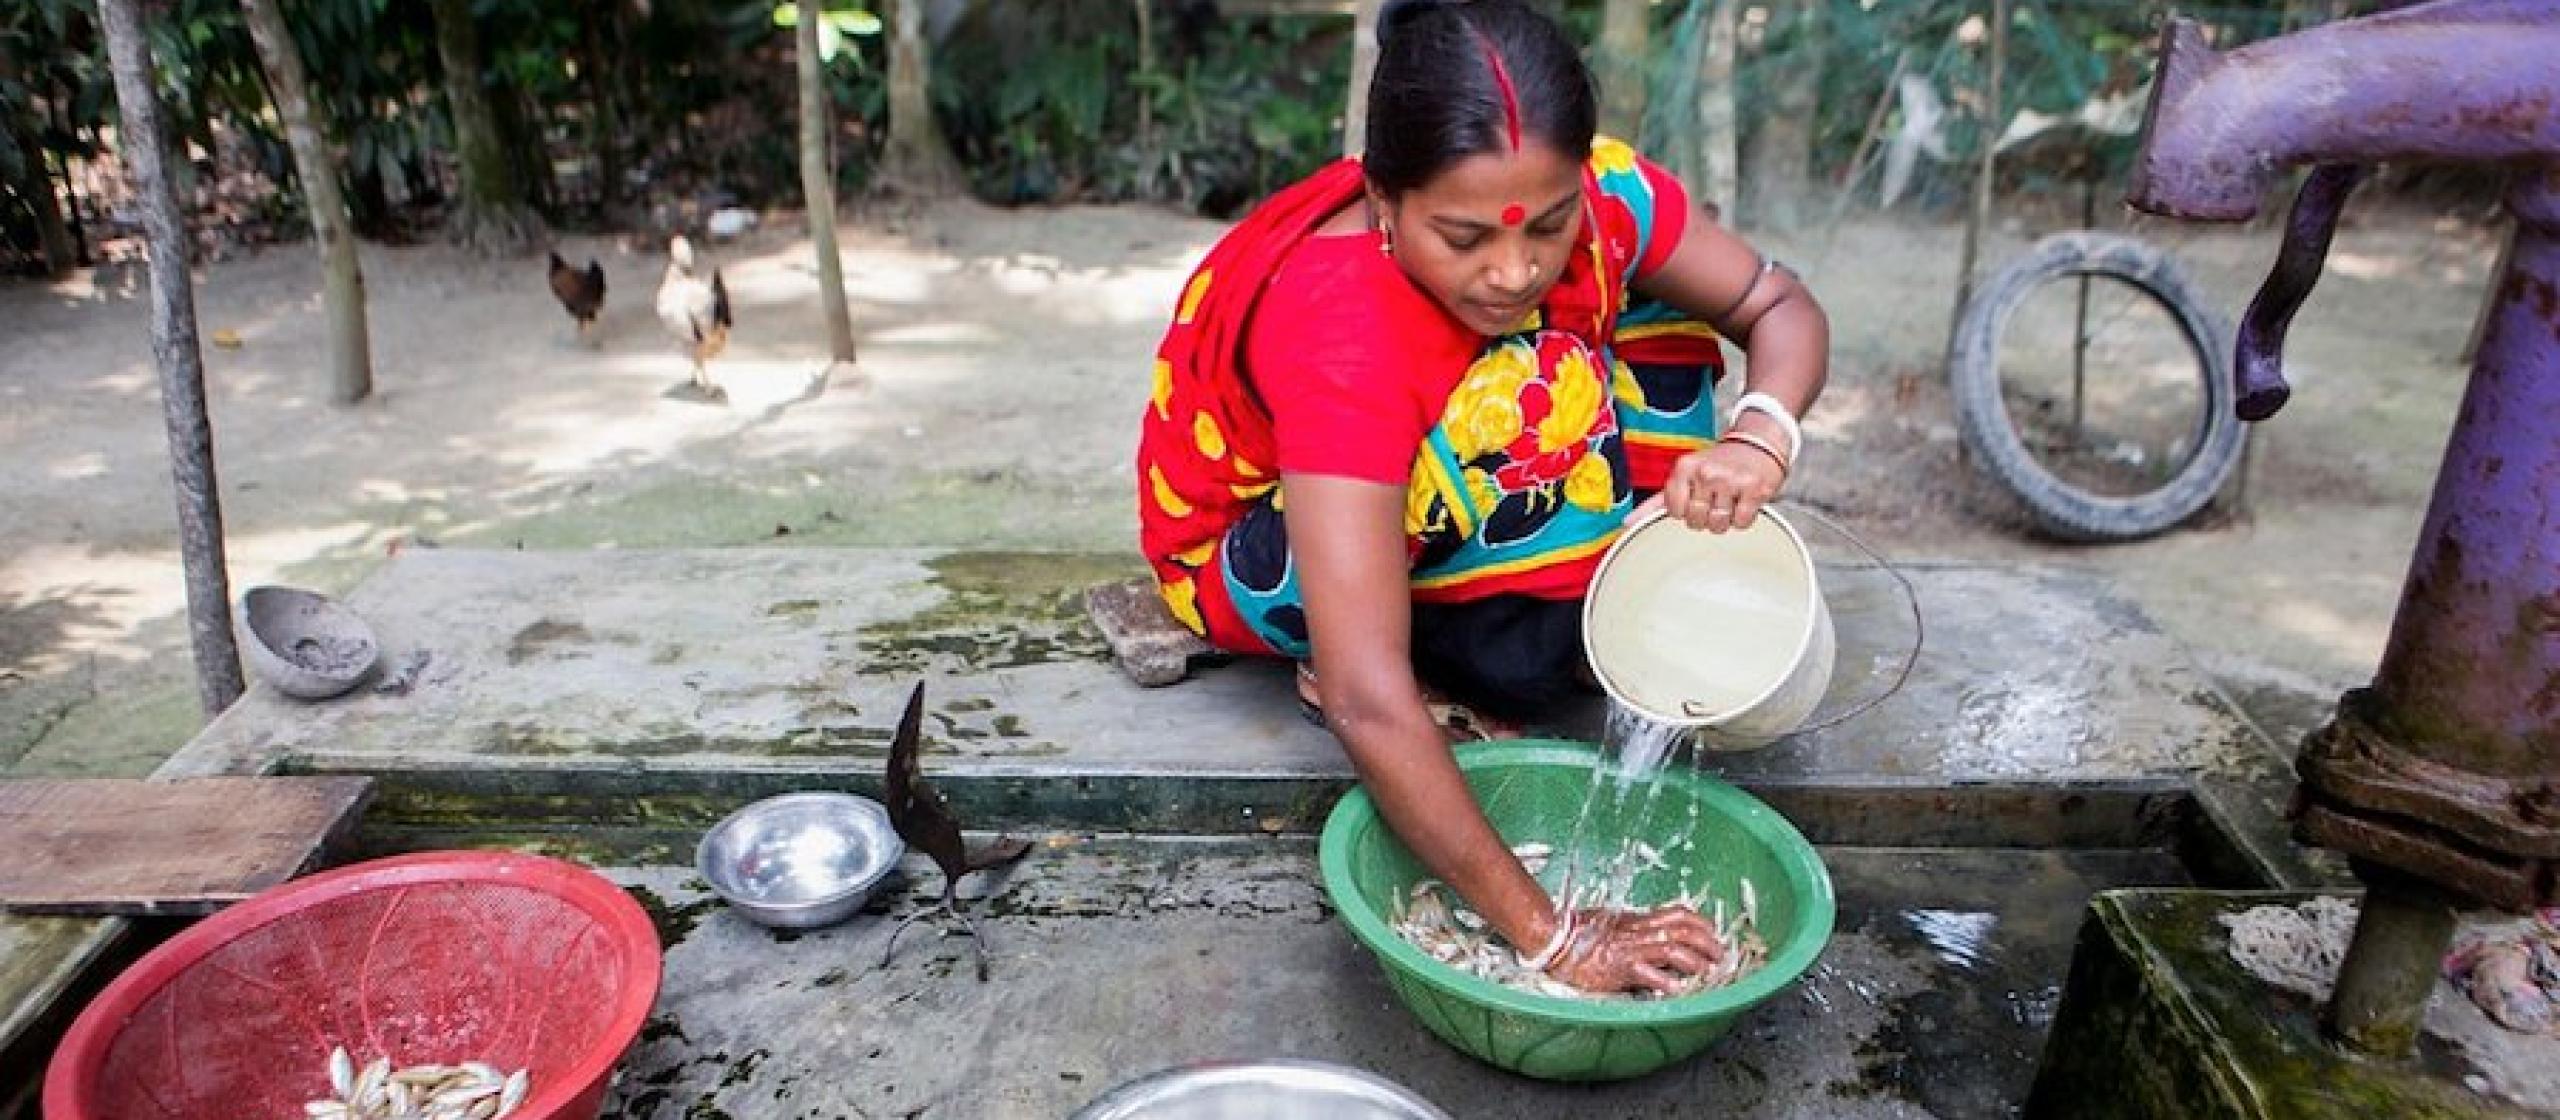 Santona Rani cleaning mola fish in preparation for cooking. She is a member of an AIN-supported nutrition group, where she learned how to use a gill net and the nutritional benefits of eating mola. In Madhob pasha, Babugong, Barisal, Bangladesh.